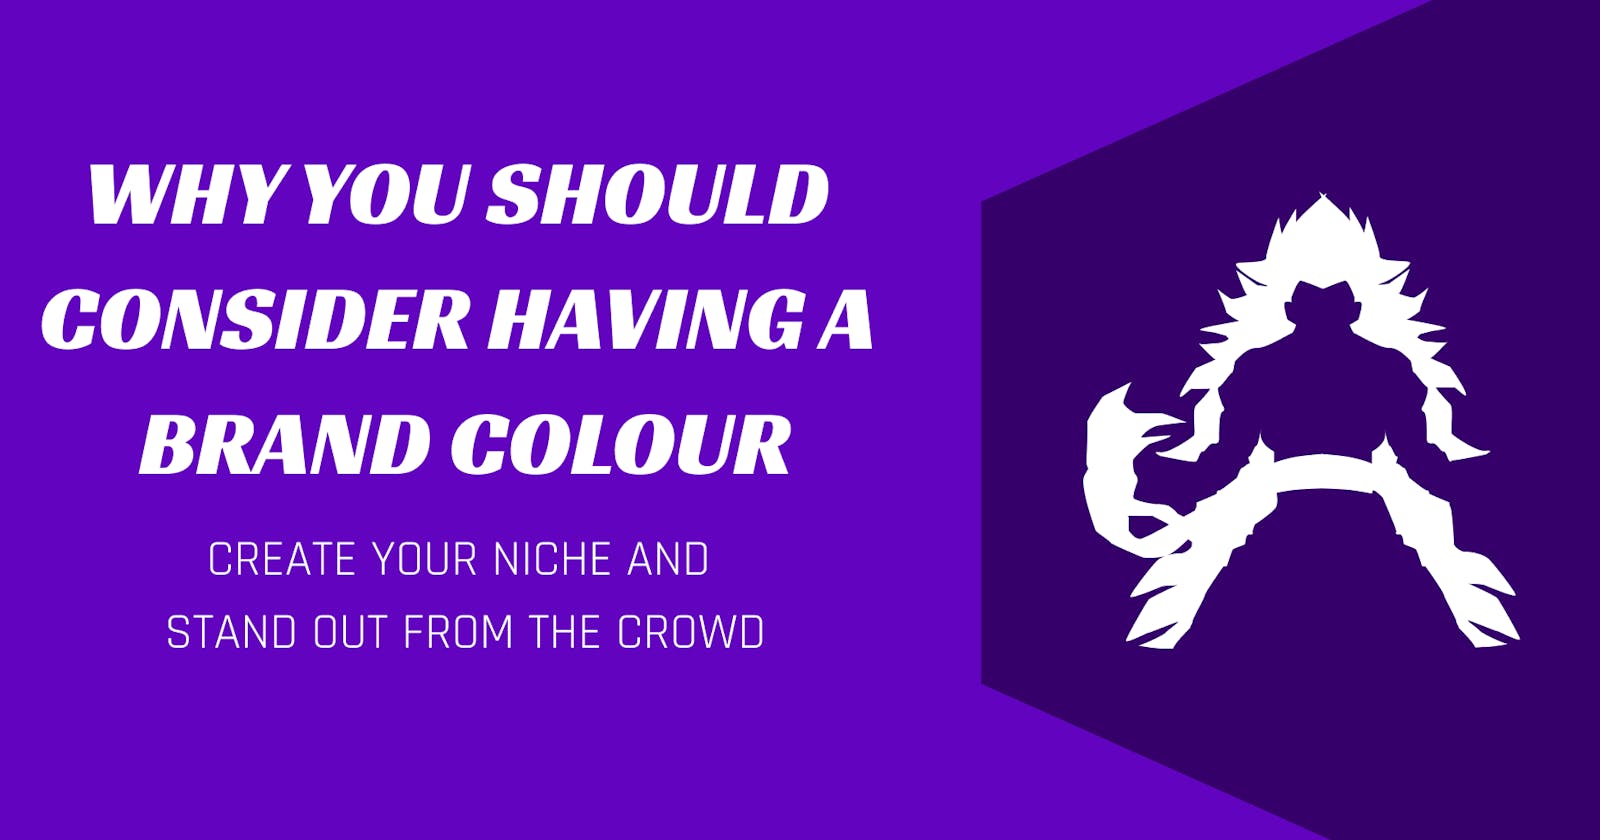 Why you should consider having a brand colour